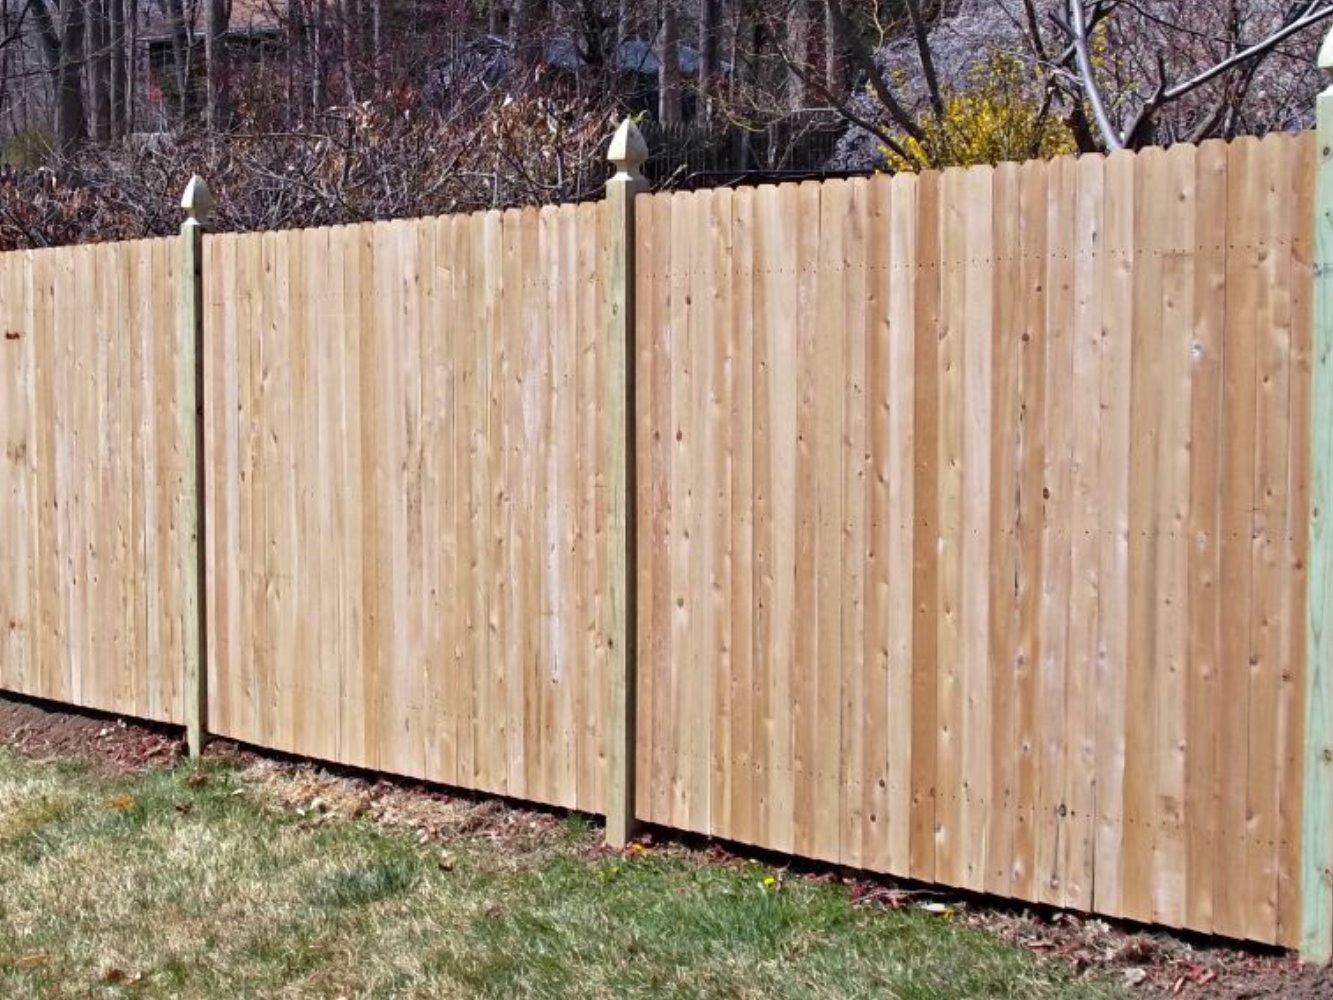 Dobbs Ferry New York privacy fencing